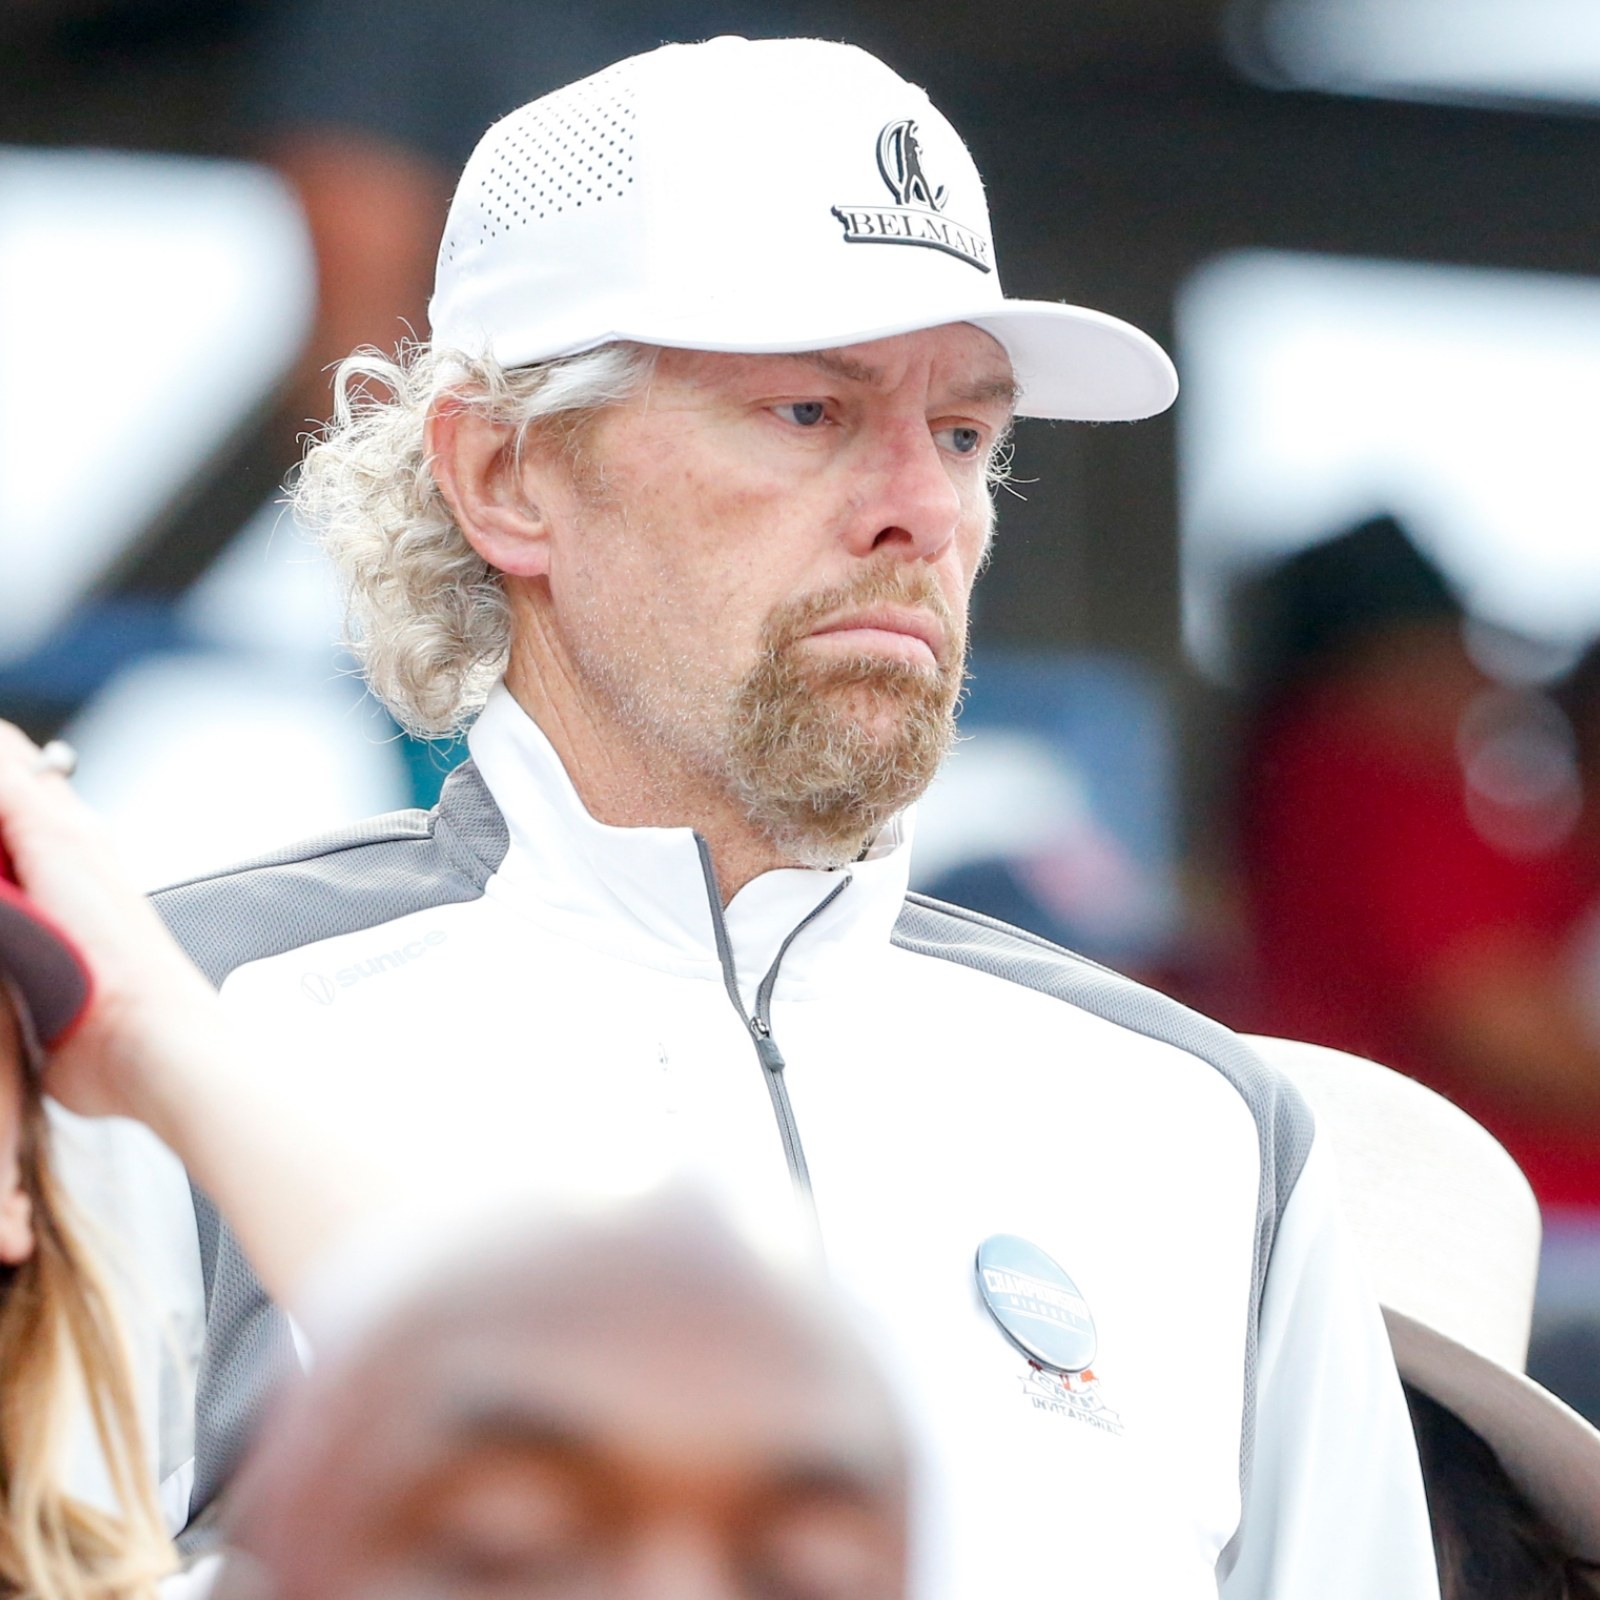 Toby Keith's Latest Health Update Amid Cancer Diagnosis